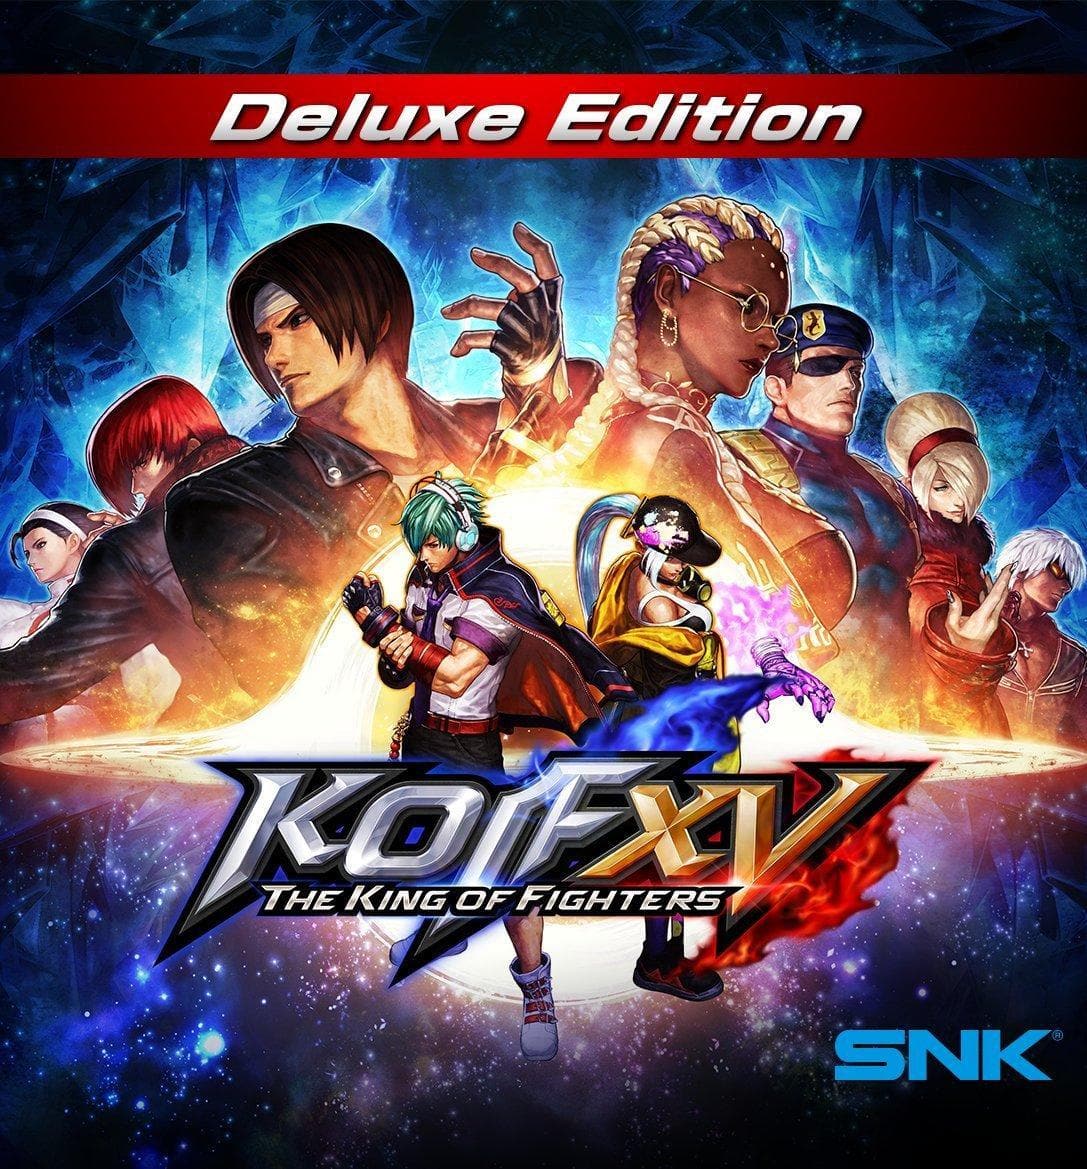 The King of Fighters XV (Deluxe Edition) - Xbox Series X/S - EXON - גיימינג ותוכנות - משחקים ותוכנות למחשב ולאקס בוקס!